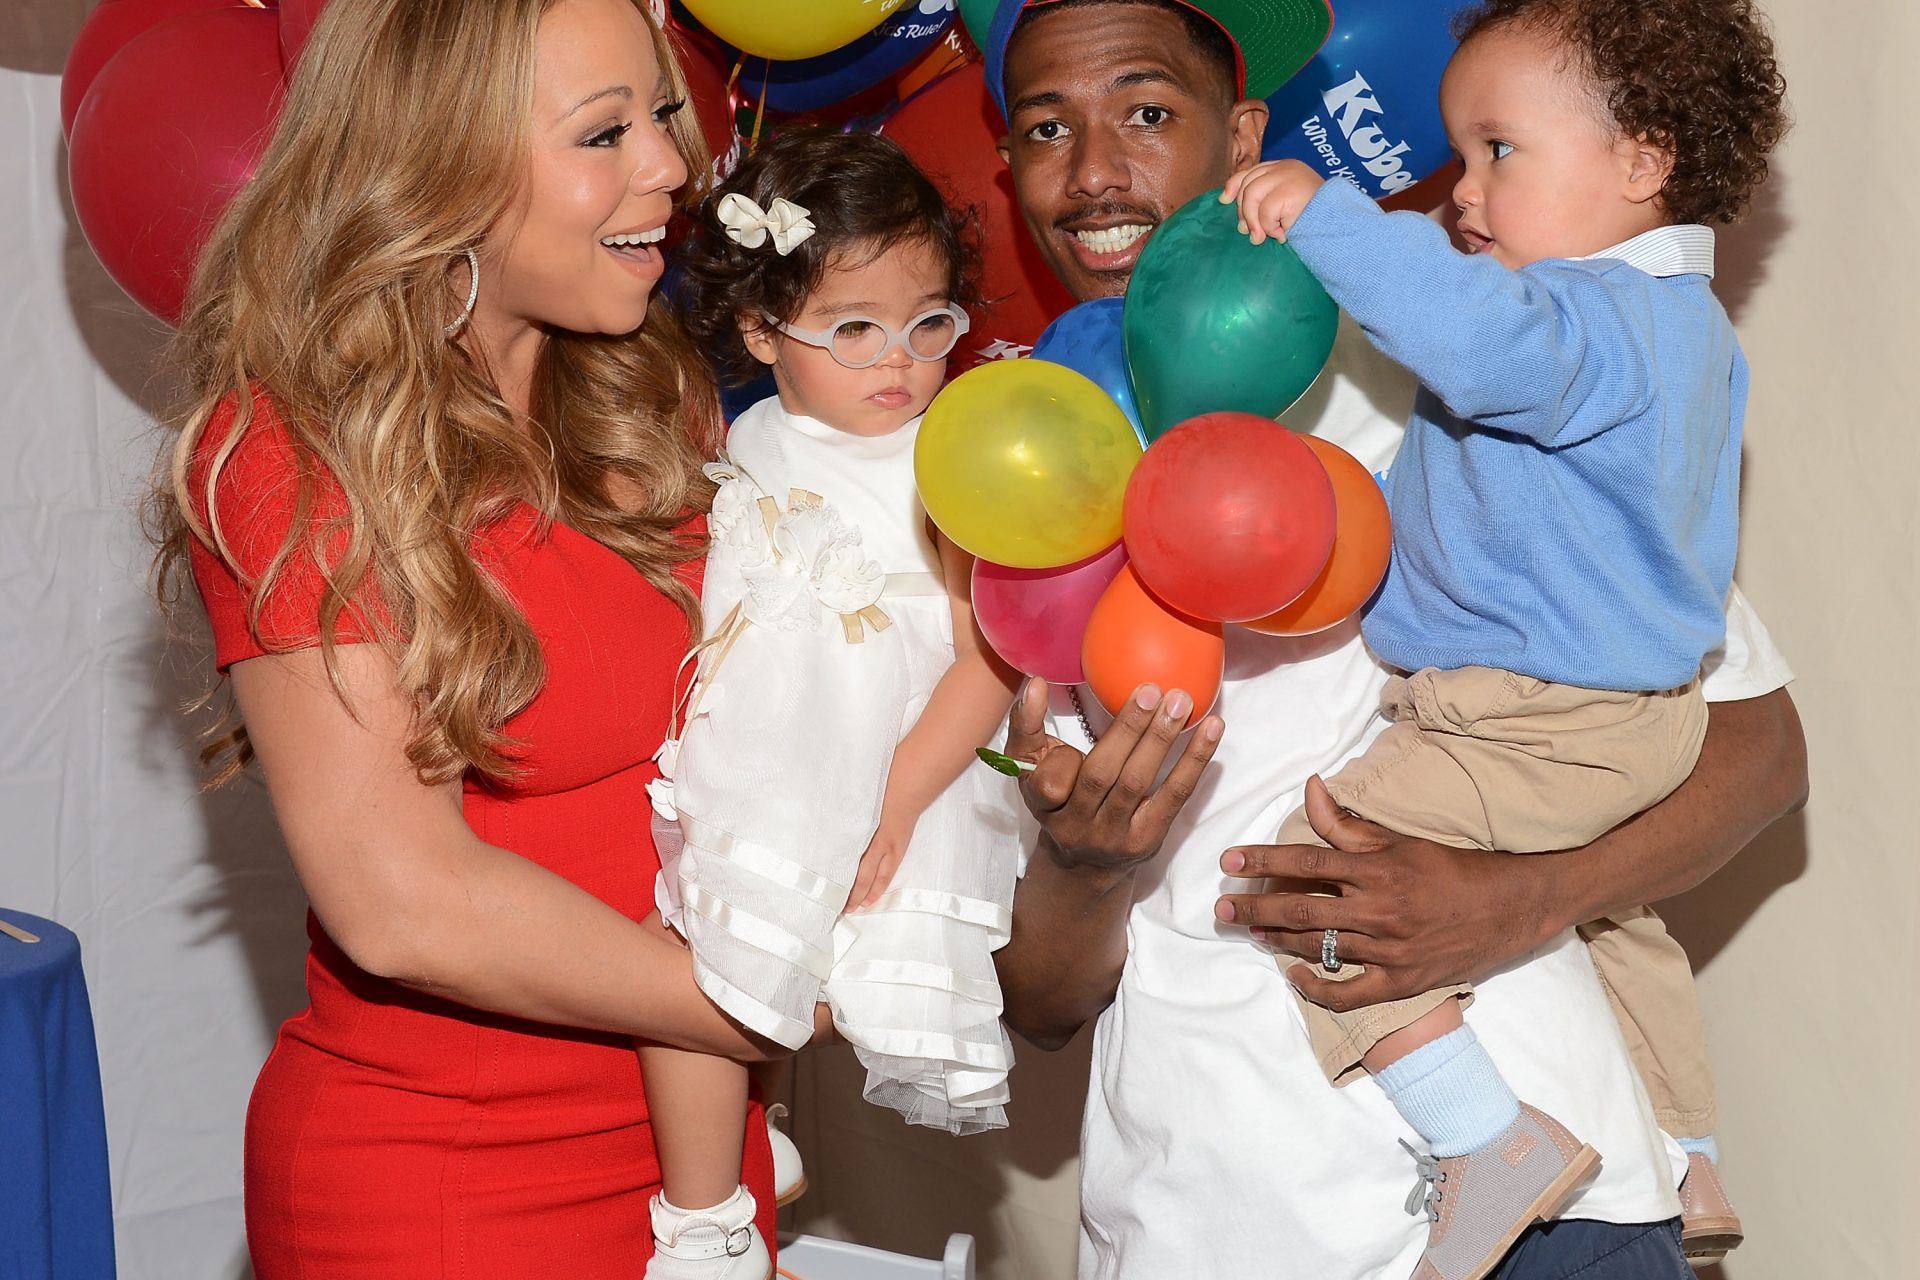 If Christmas 2022 was any indication, Nick Cannon will spend a lot of time on the road